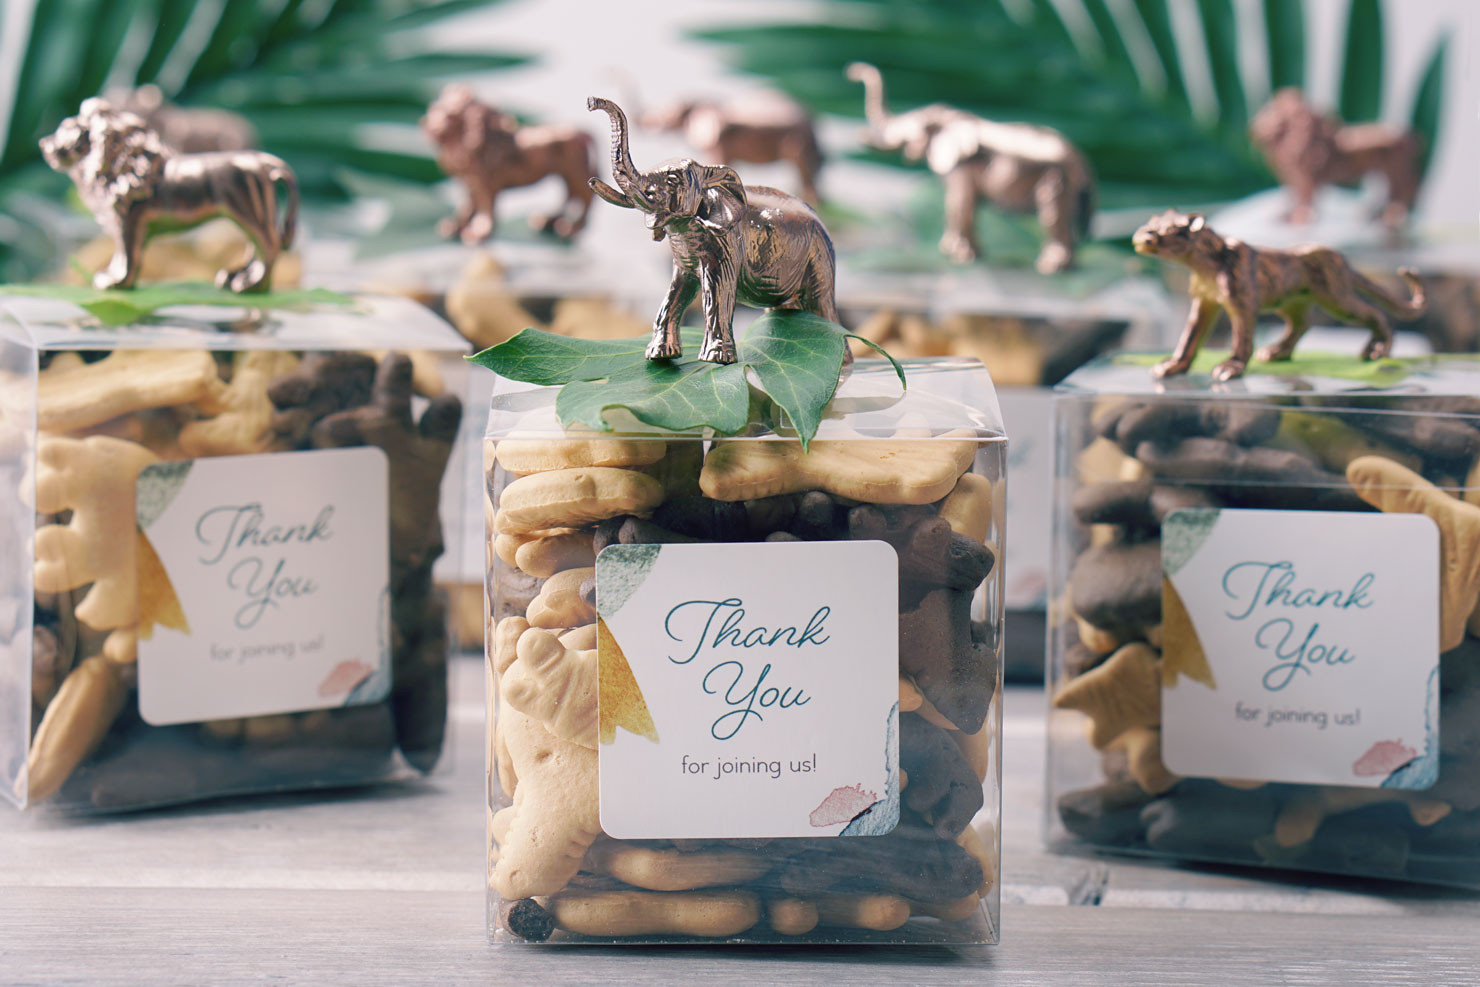 Safari Baby Shower Party Favors
 The Best Safari Baby Shower Ideas 2019